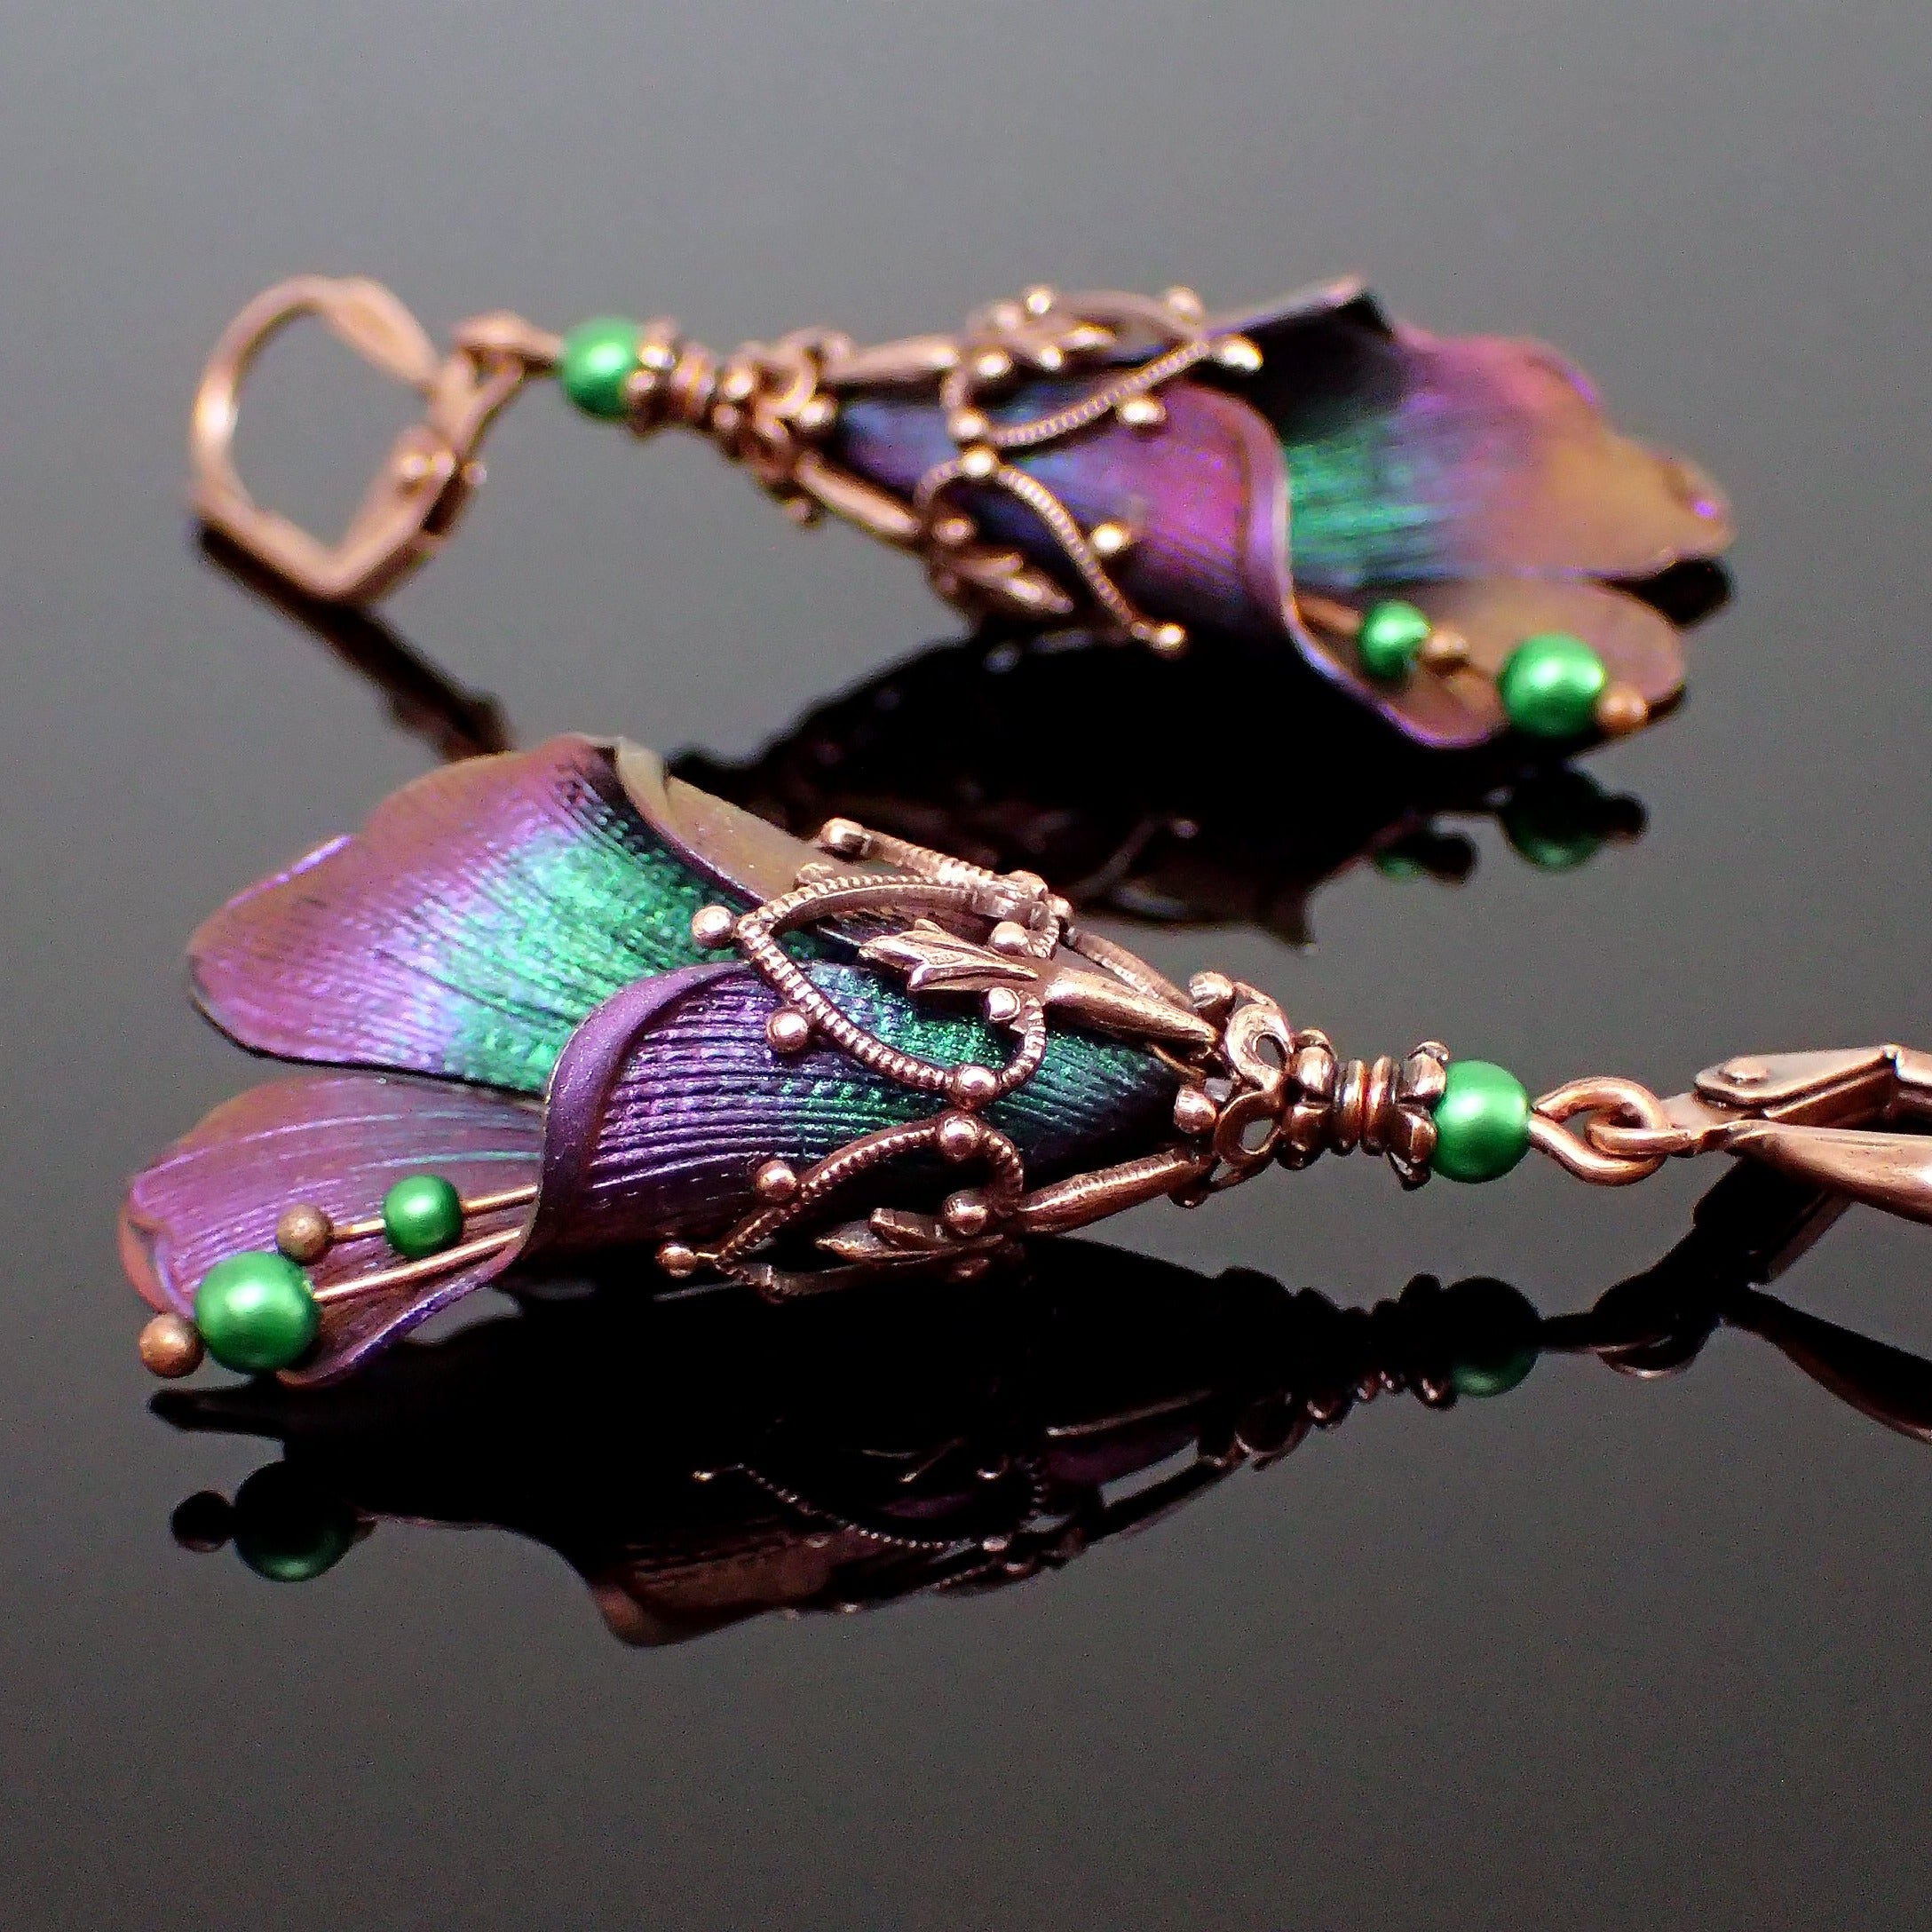 color shifting chameleon iridescent flower earrings with antiqued copper